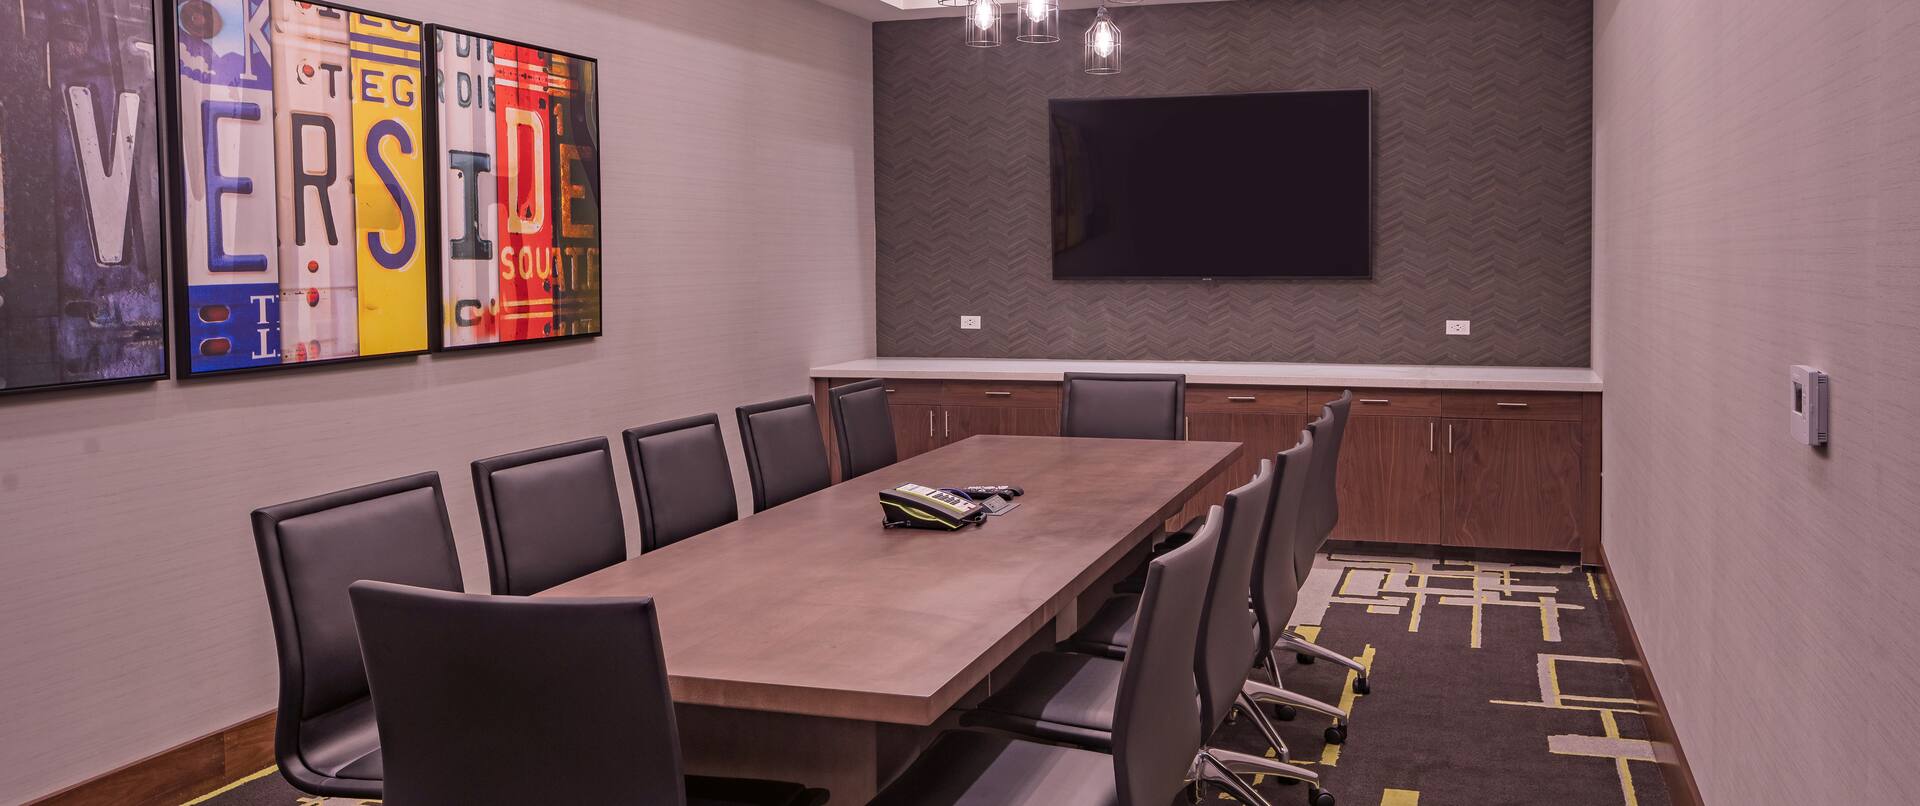 Boardroom with Meeting Table, Chairs and Wall Mounted TV